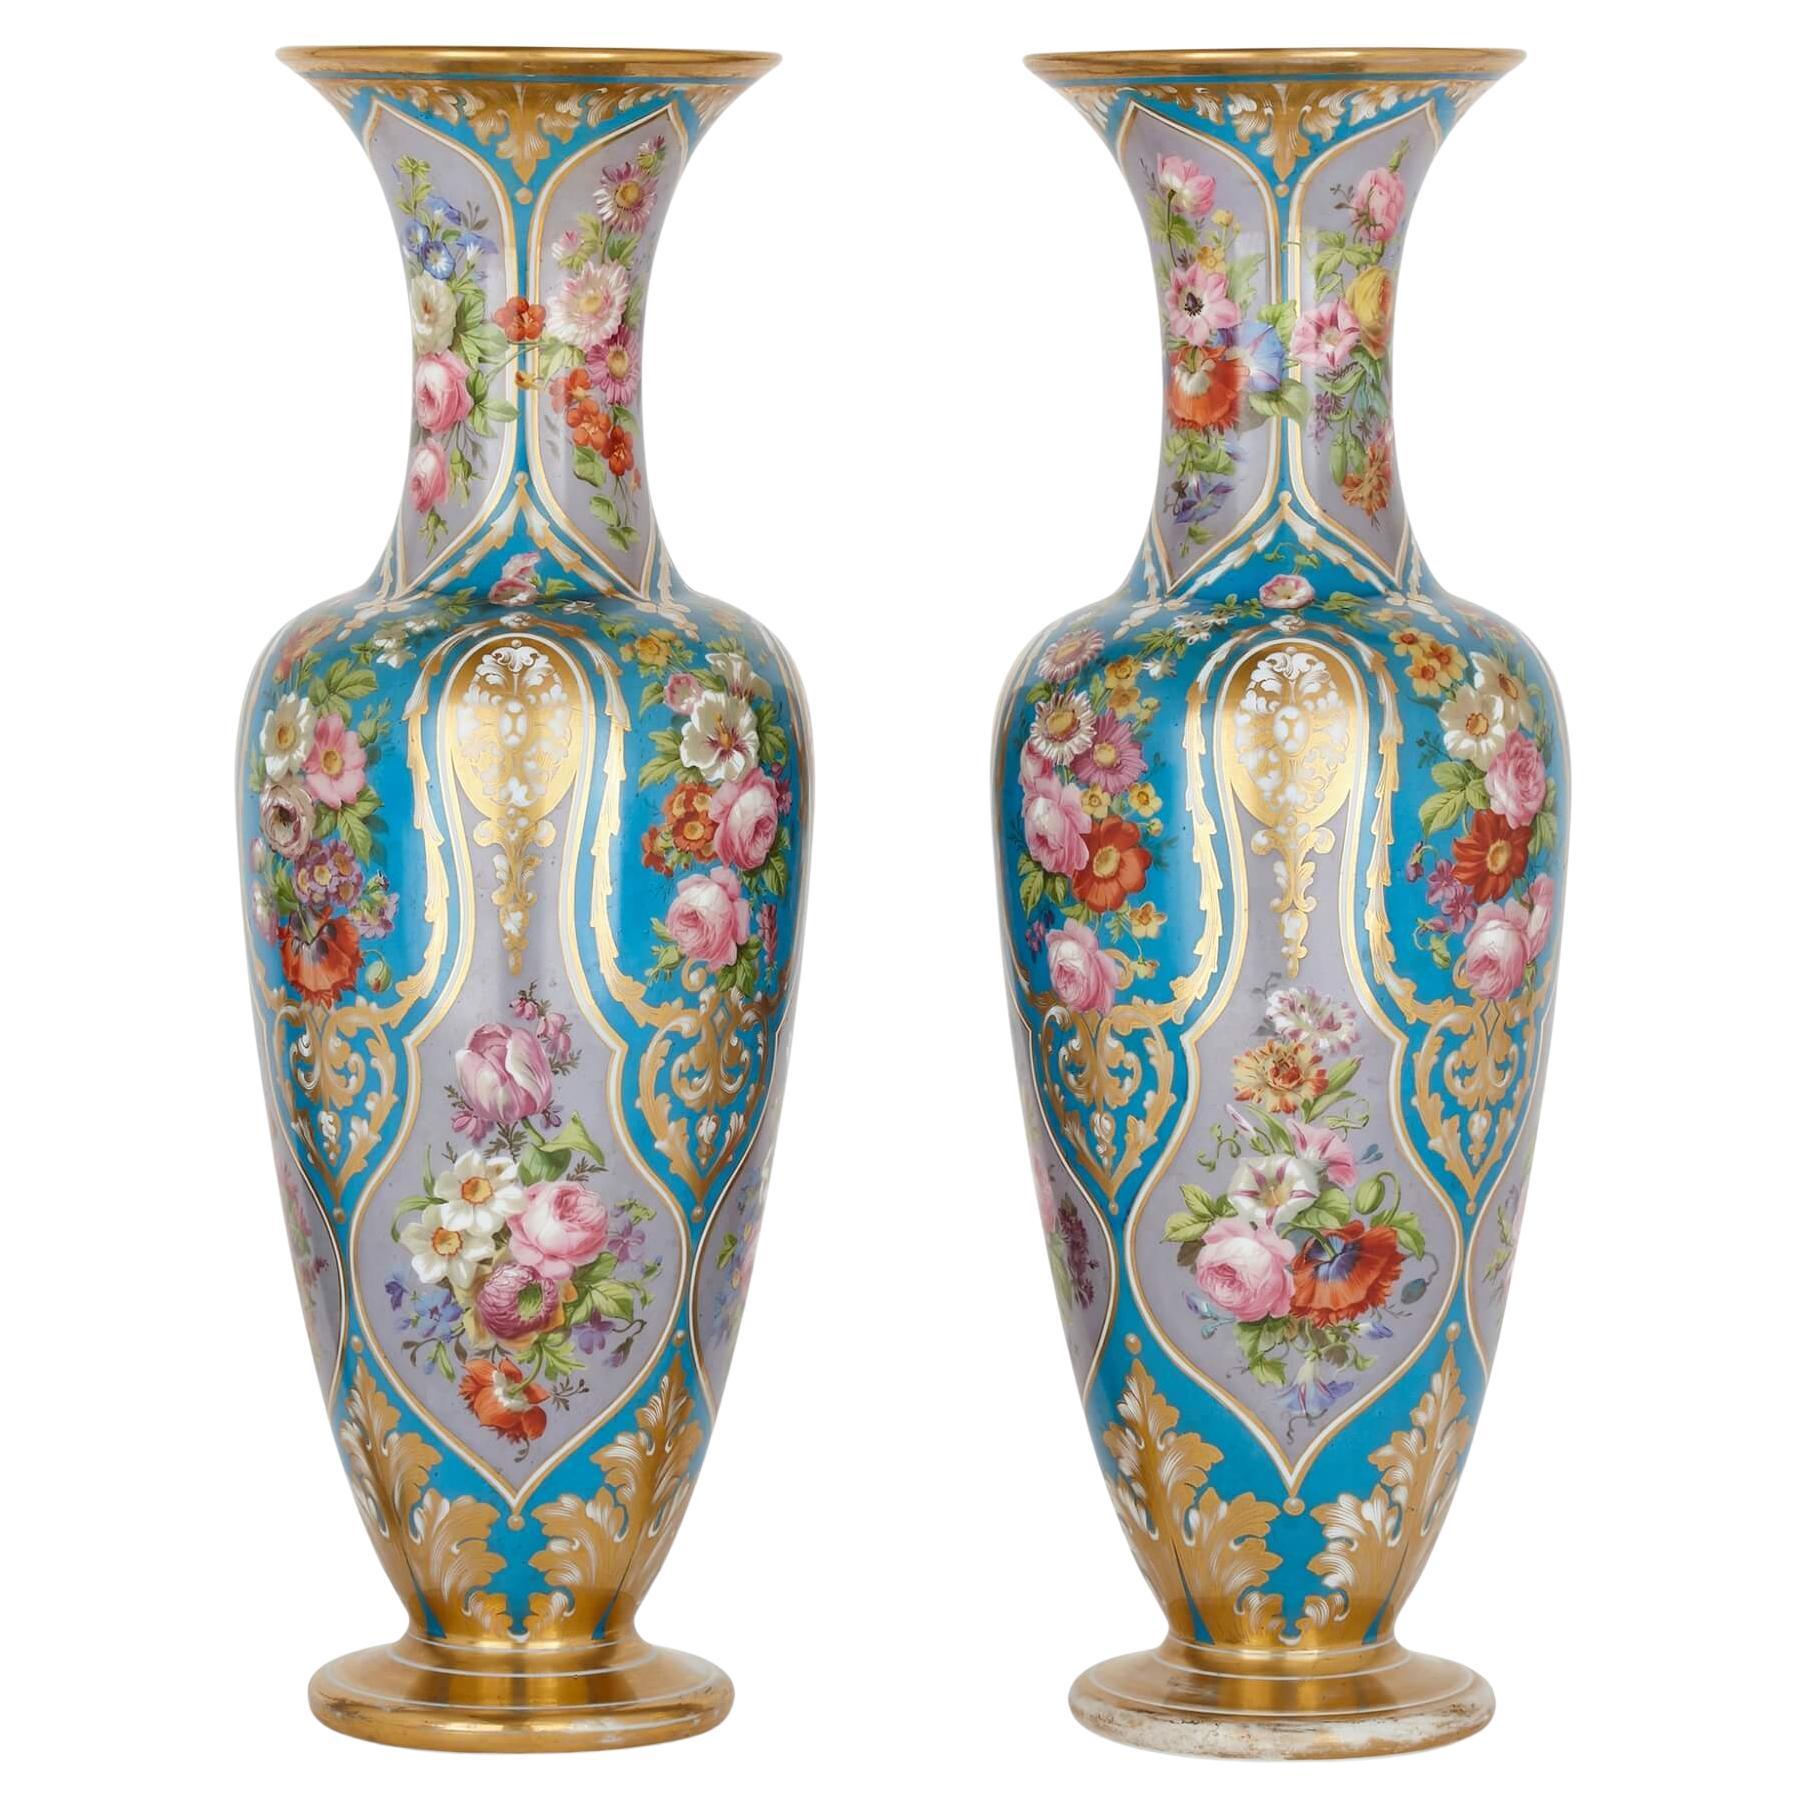 Pair of Antique French Floral Glass Vases by Baccarat For Sale